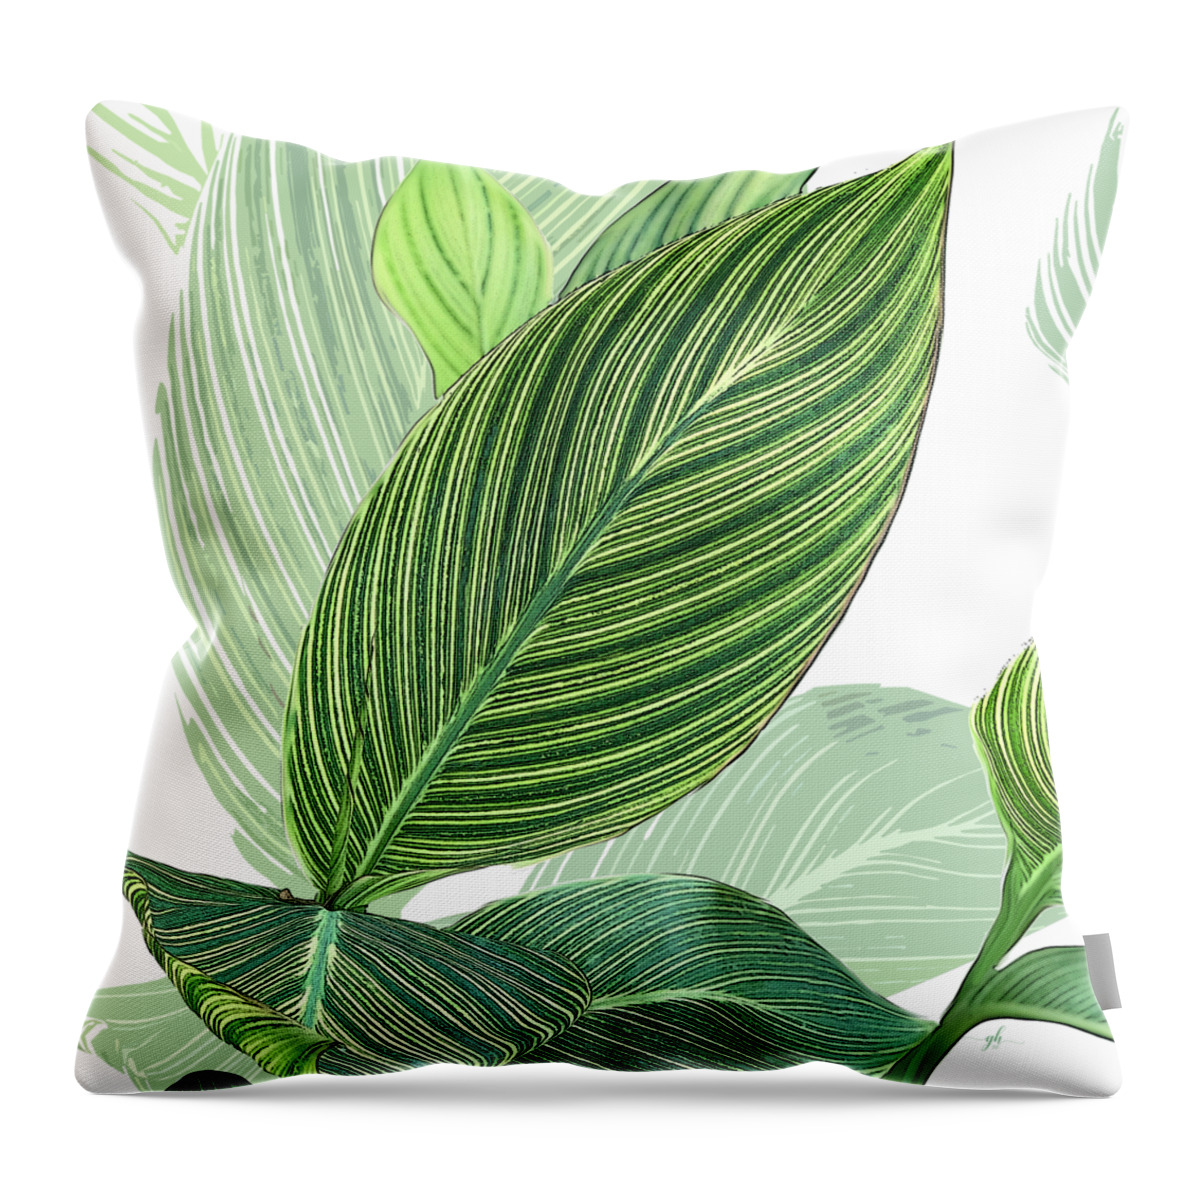 Foliage Throw Pillow featuring the digital art Variegated by Gina Harrison